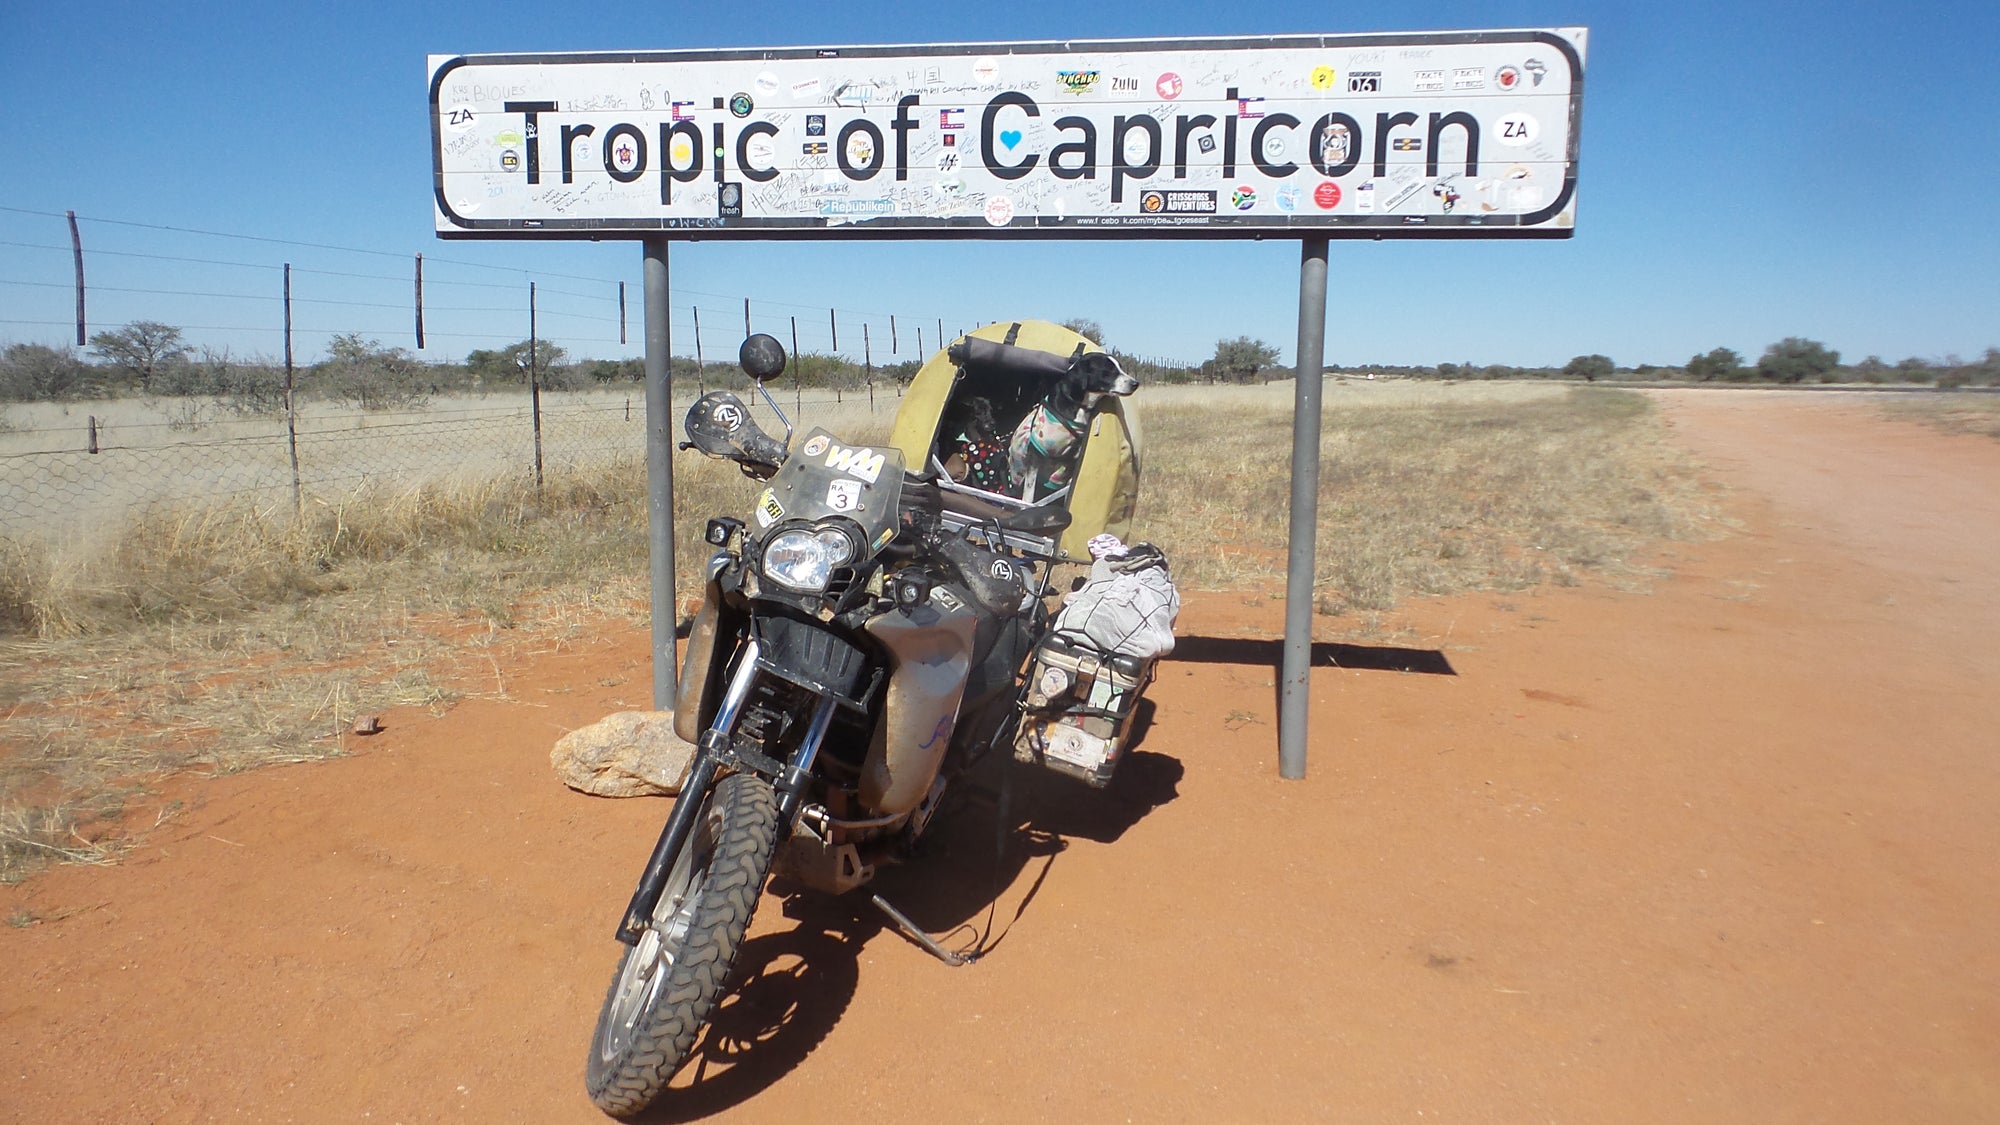 The Pack Track crossed the Tropic of Capricorn, Namibia. Weeti and Shadow were so excited about getting a photo in their Pillion Pooch under the sign.